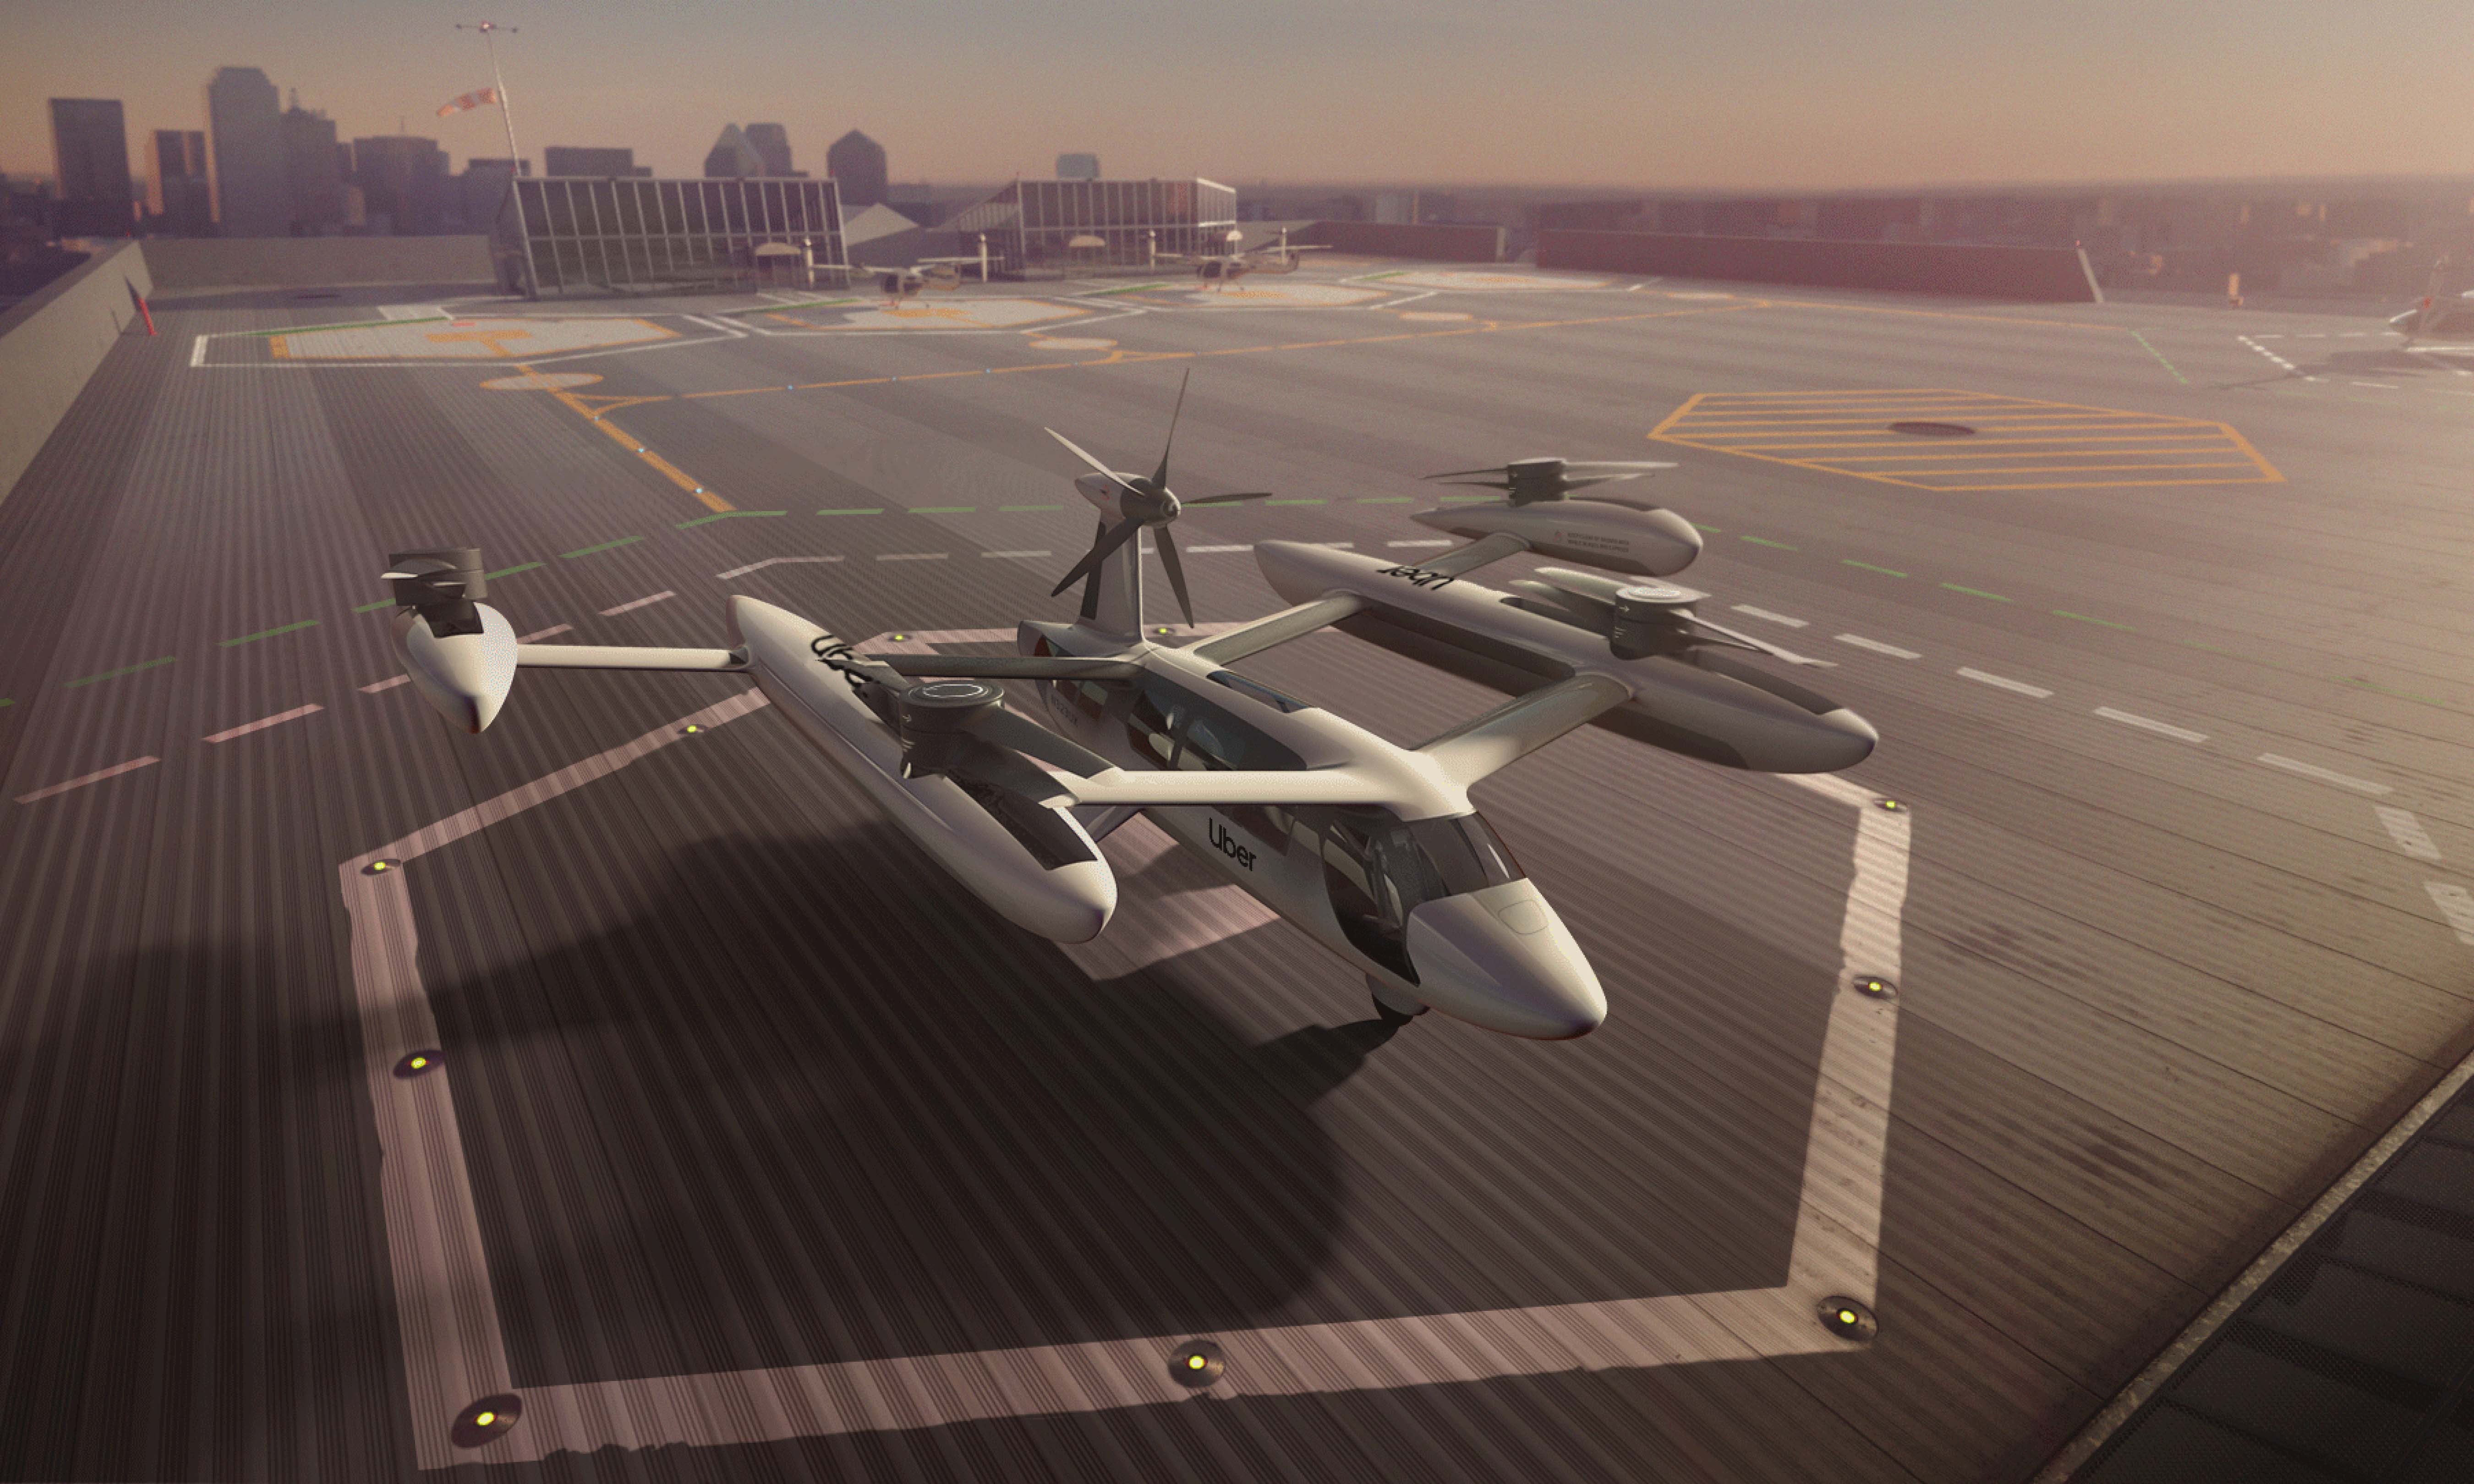 Uber Air is coming to Melbourne. The "flying taxi" scheme is expected to start testing in 2020. Photo: Uber